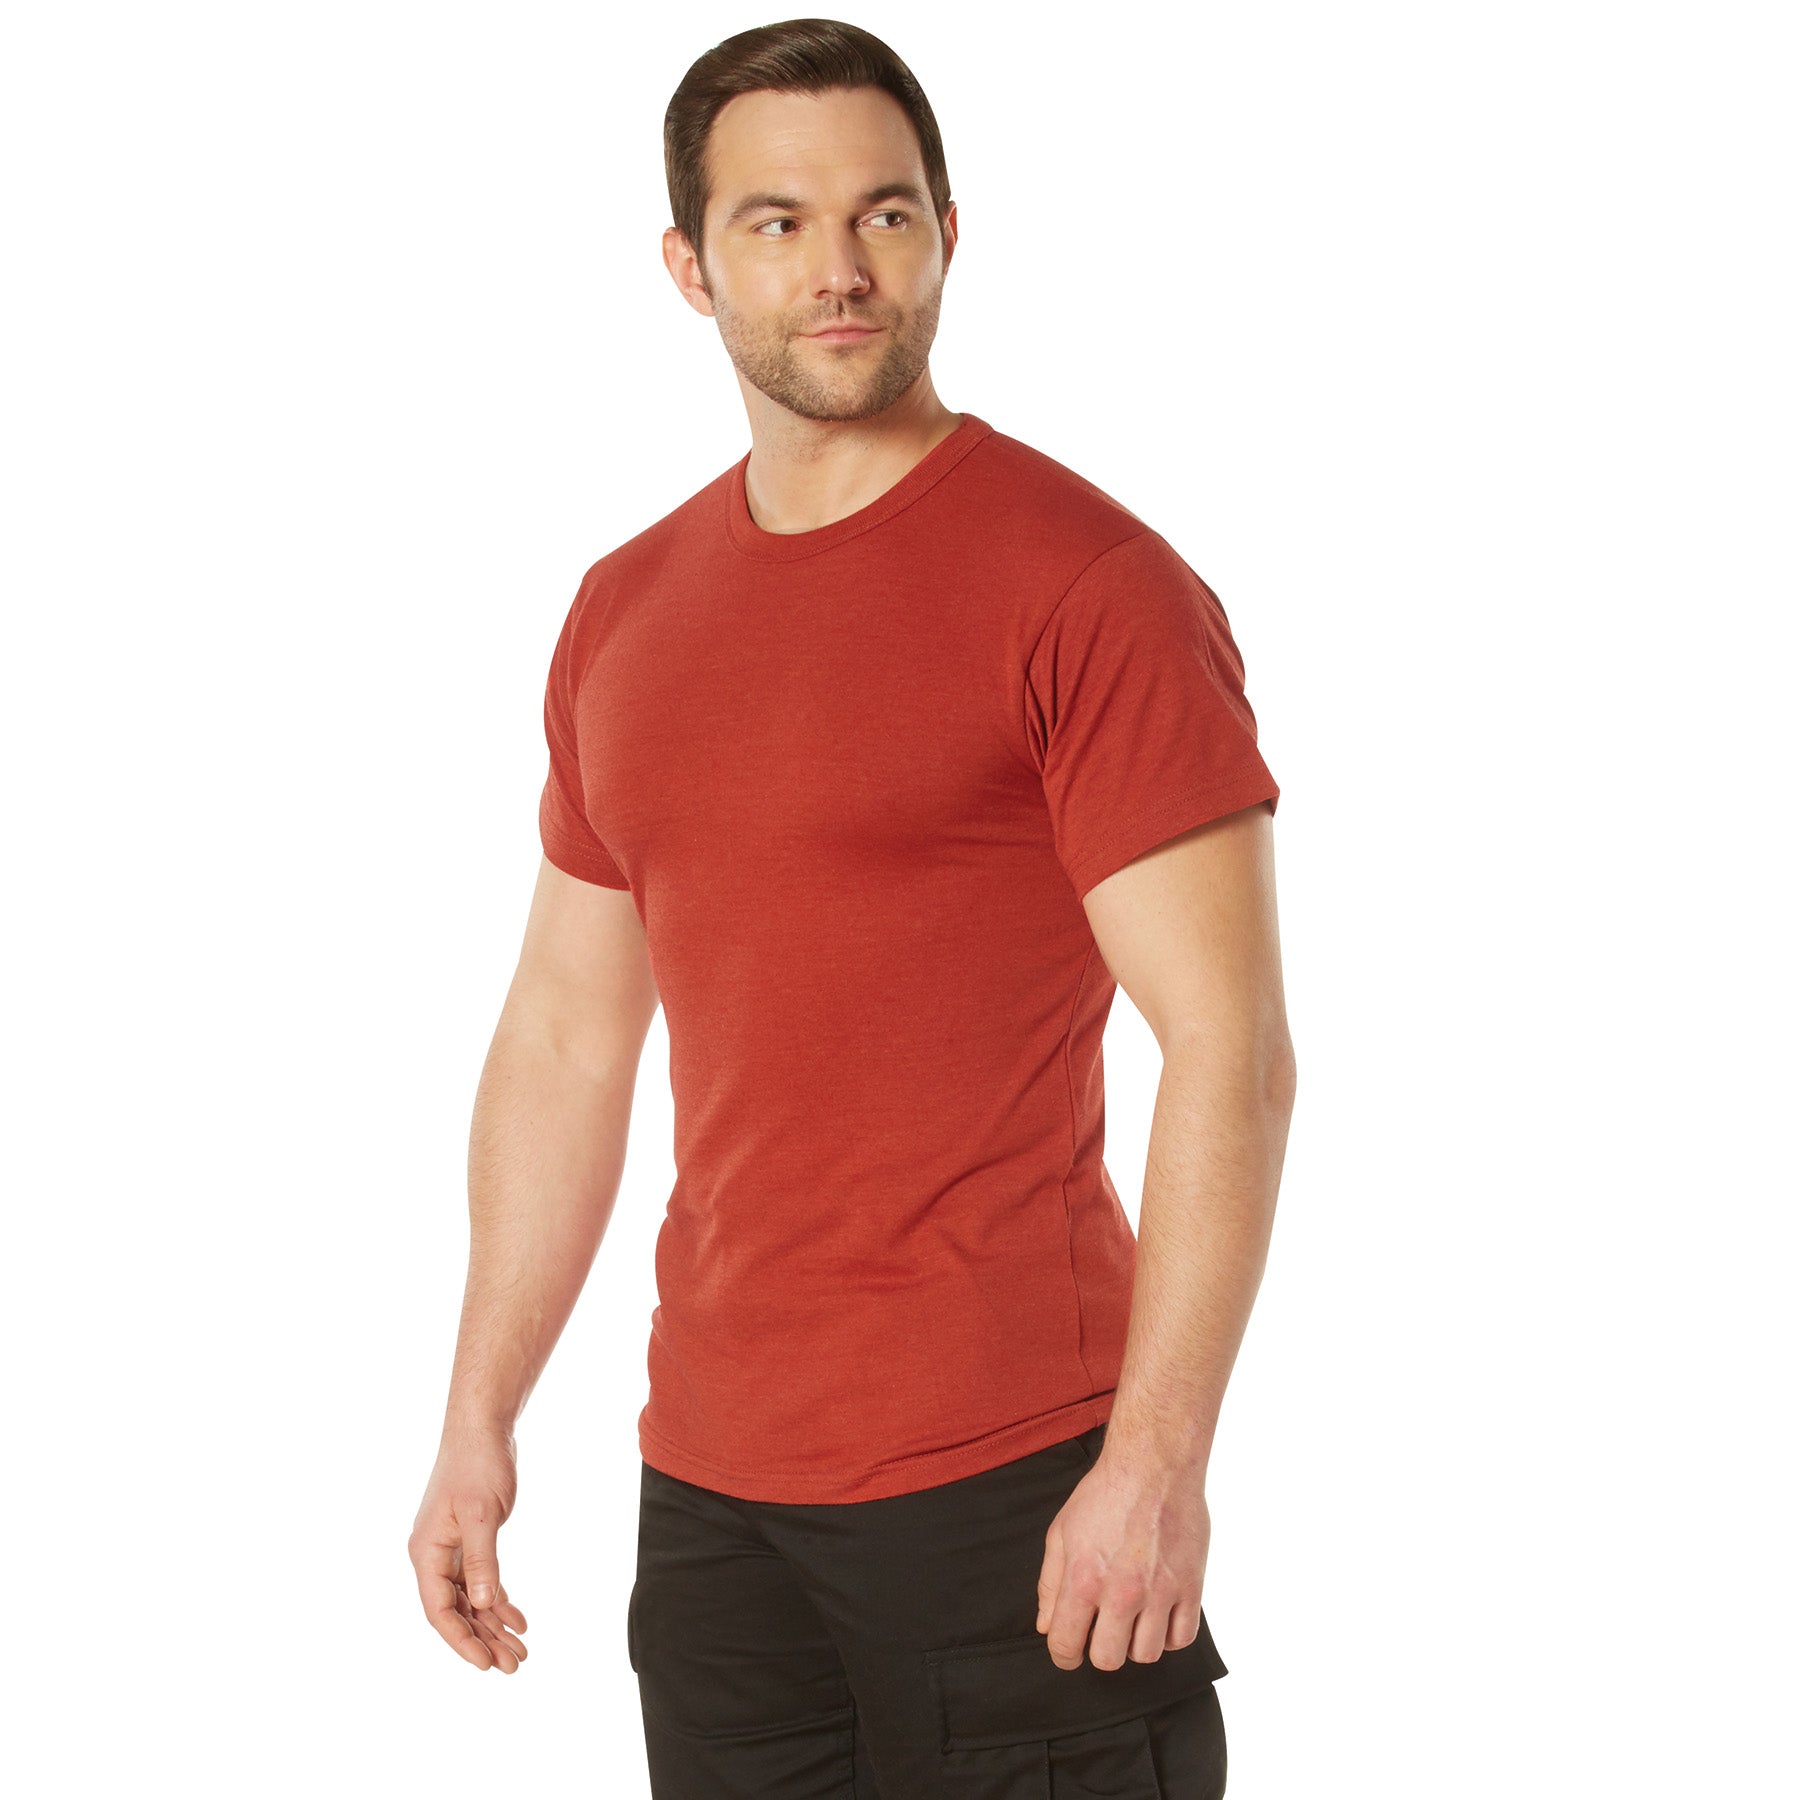 [AR 670-1][Military] Poly/Cotton T-Shirts Heather Red